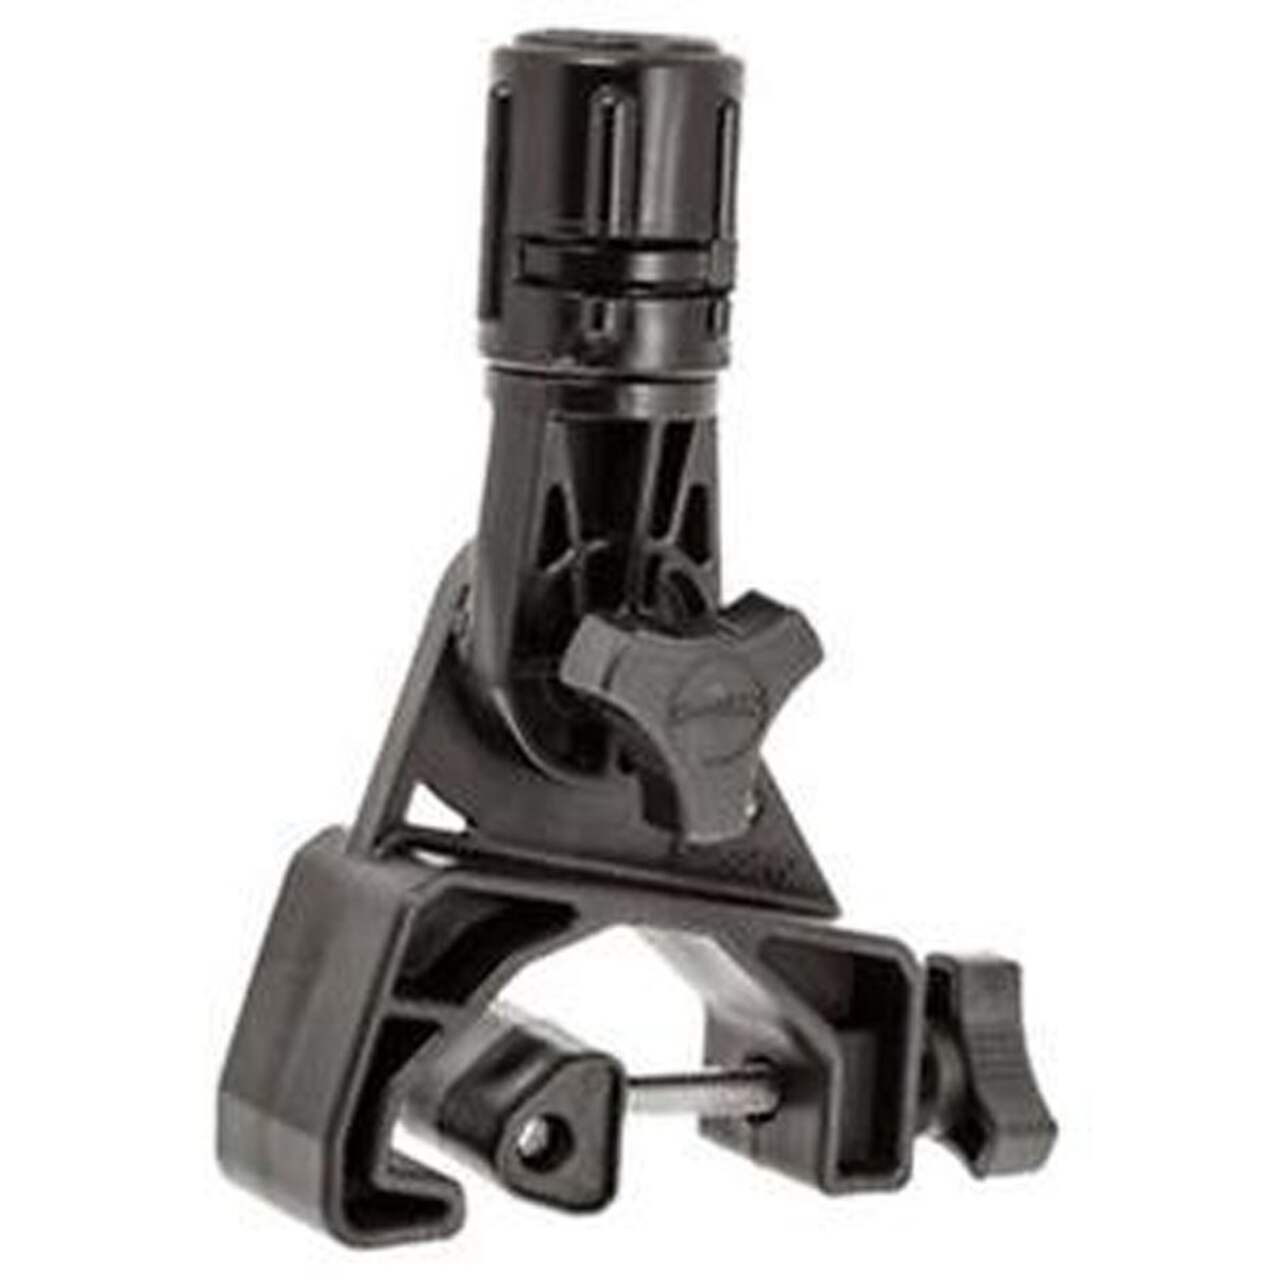 Scotty #433 Coaming/Gunnel Clamp Mount, Includes Mounting Knobs